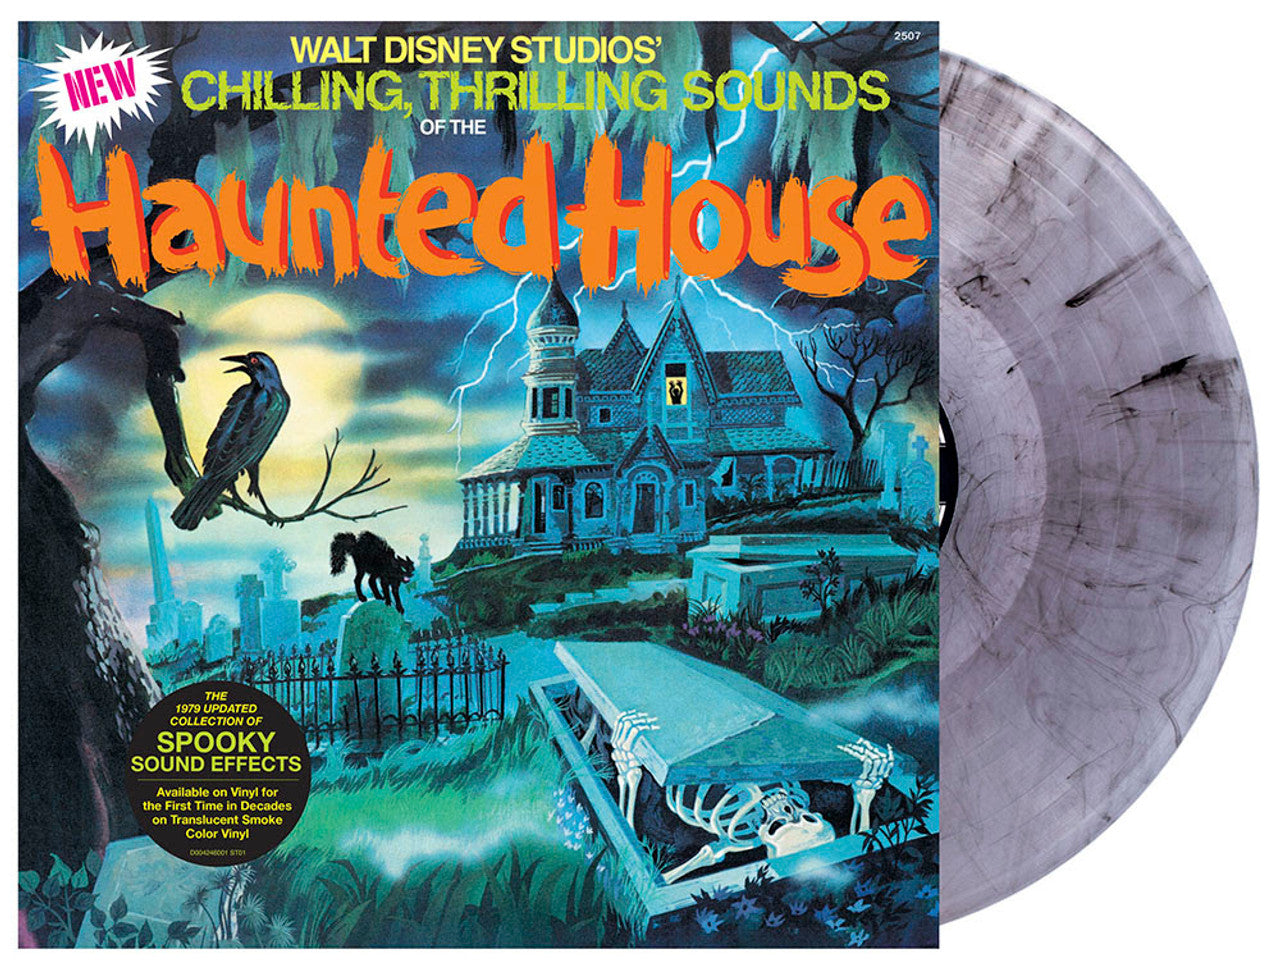 |v/a| "Chilling Thrilling Sounds of Haunted House" [Clear Smoke Vinyl]